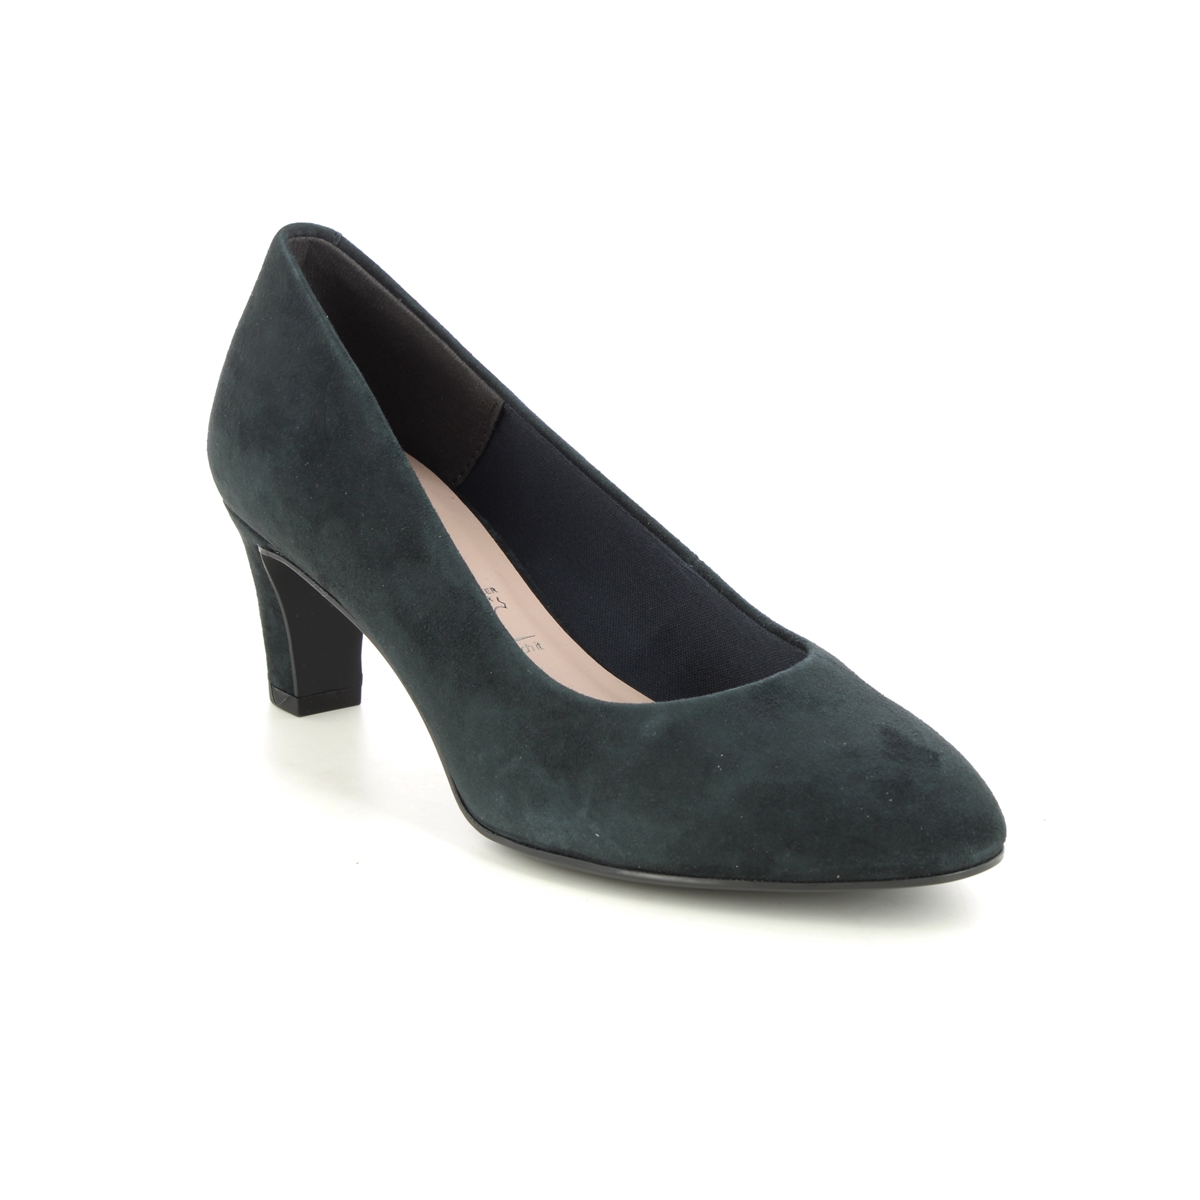 Tamaris Daenerys Navy Suede Womens Court Shoes 22420-42-807 in a Plain Leather in Size 41